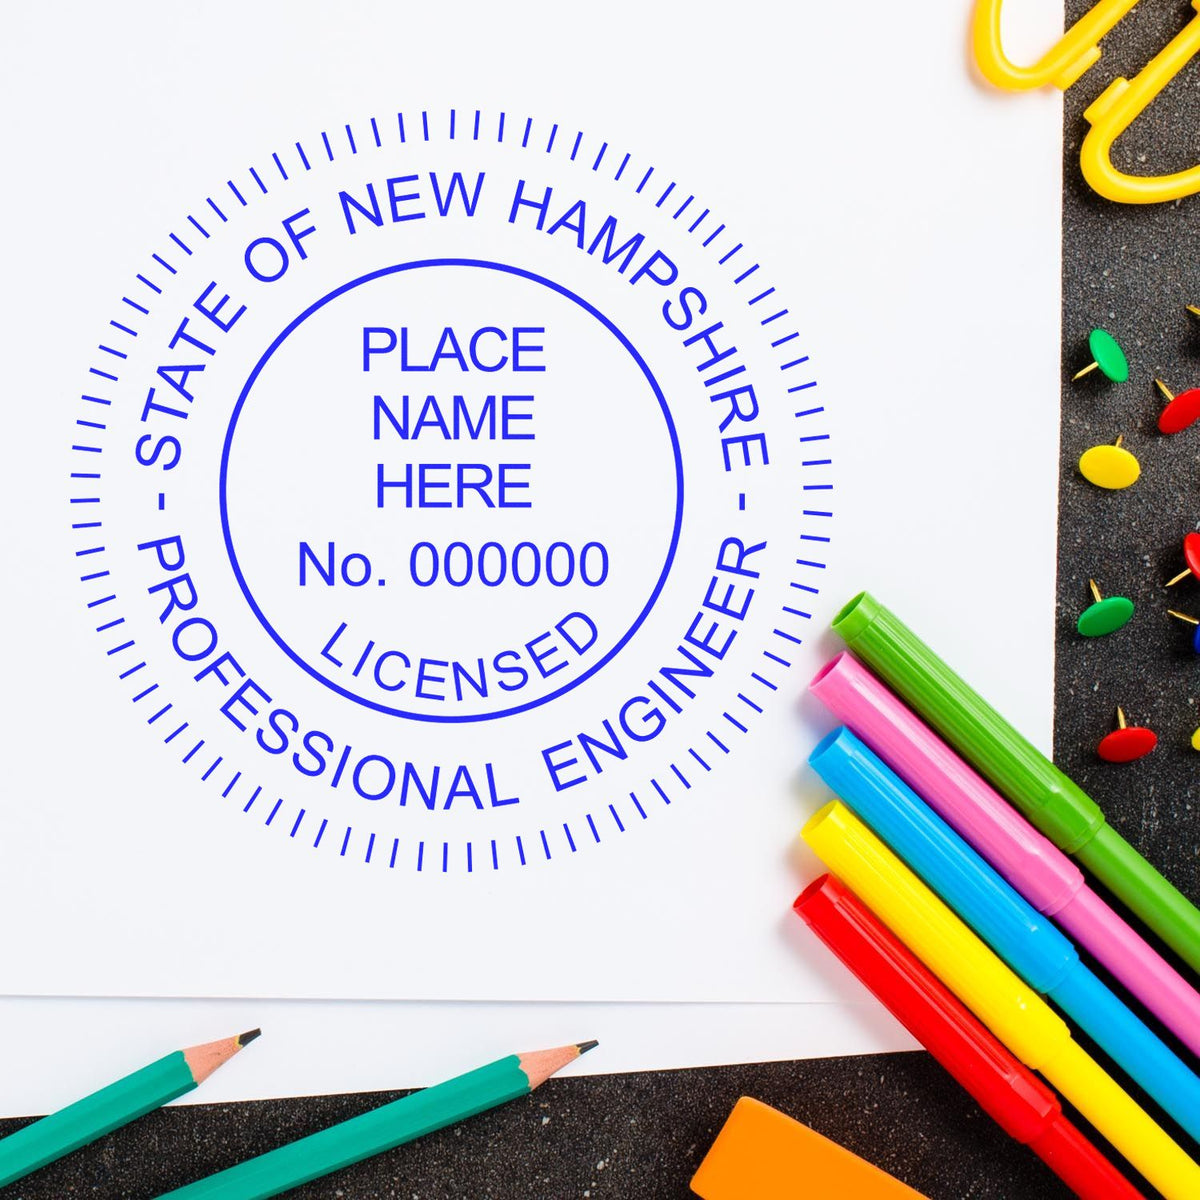 The Self-Inking New Hampshire PE Stamp stamp impression comes to life with a crisp, detailed photo on paper - showcasing true professional quality.